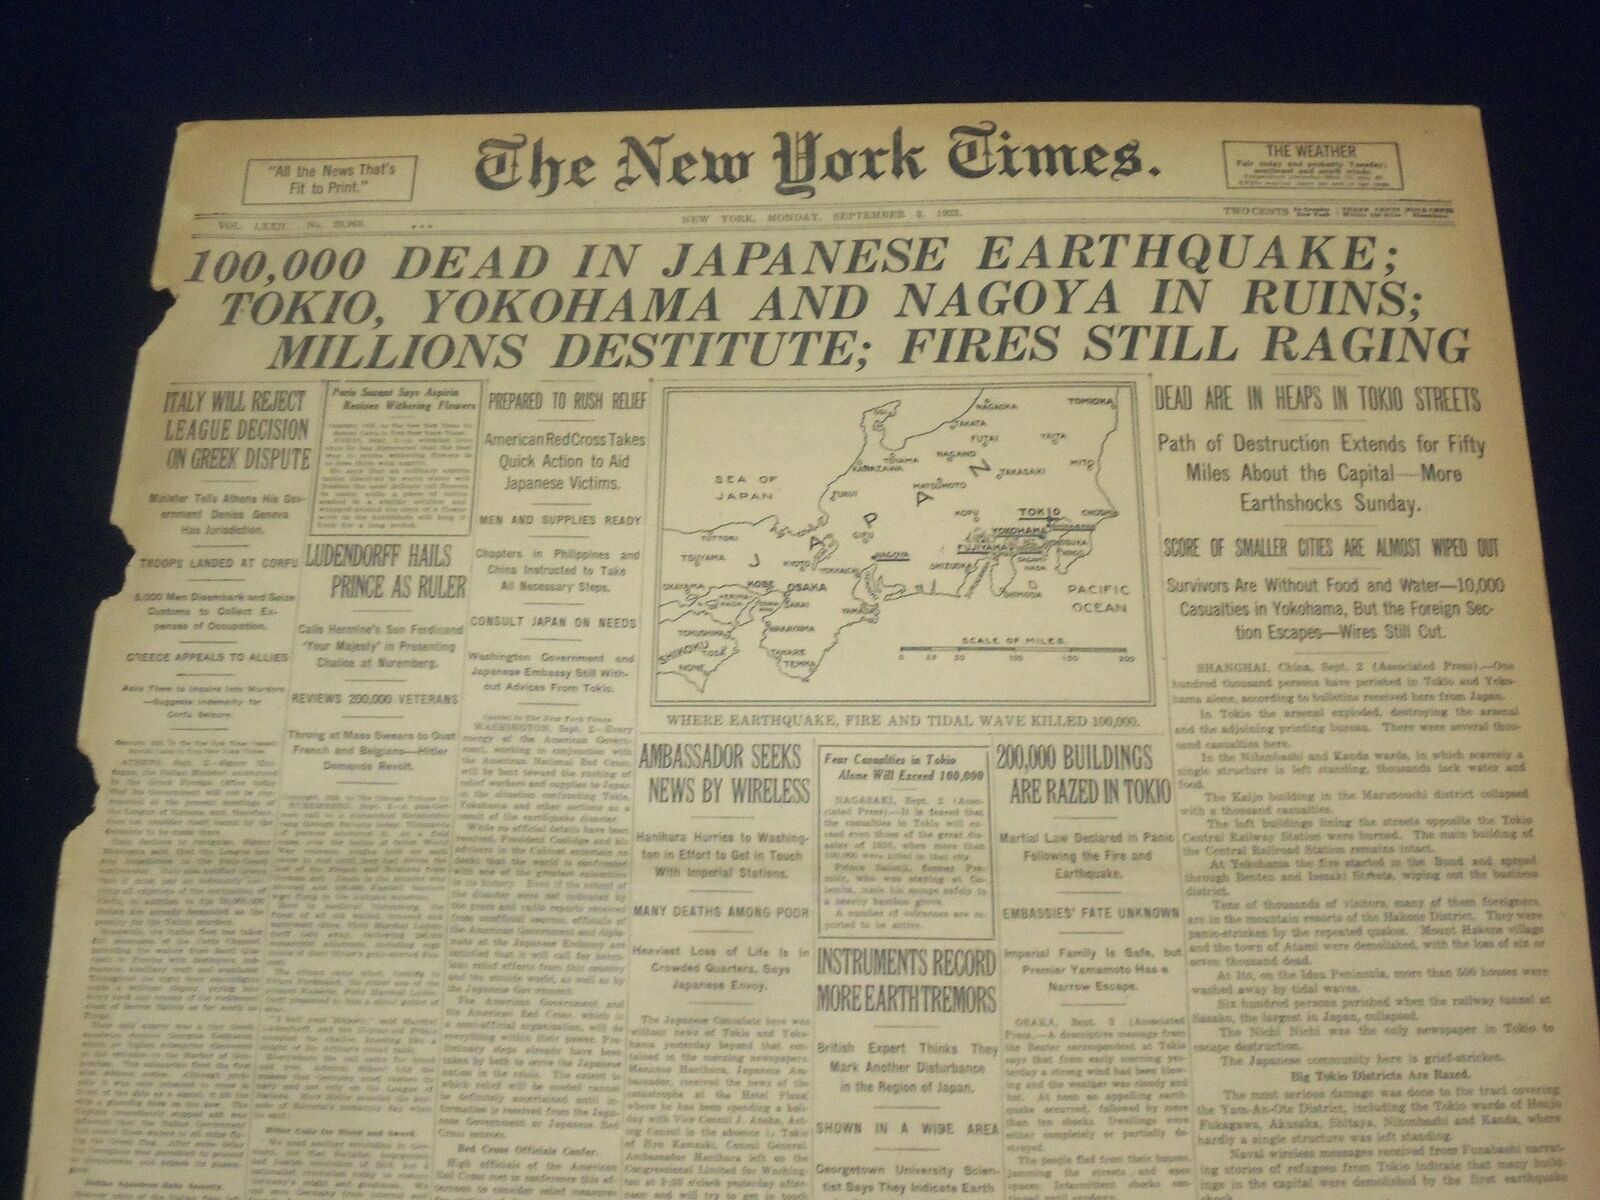 1923 SEP 3 NEW YORK TIMES - 100,000 DEAD IN JAPANESE EARTHQUAKE - NT 9347